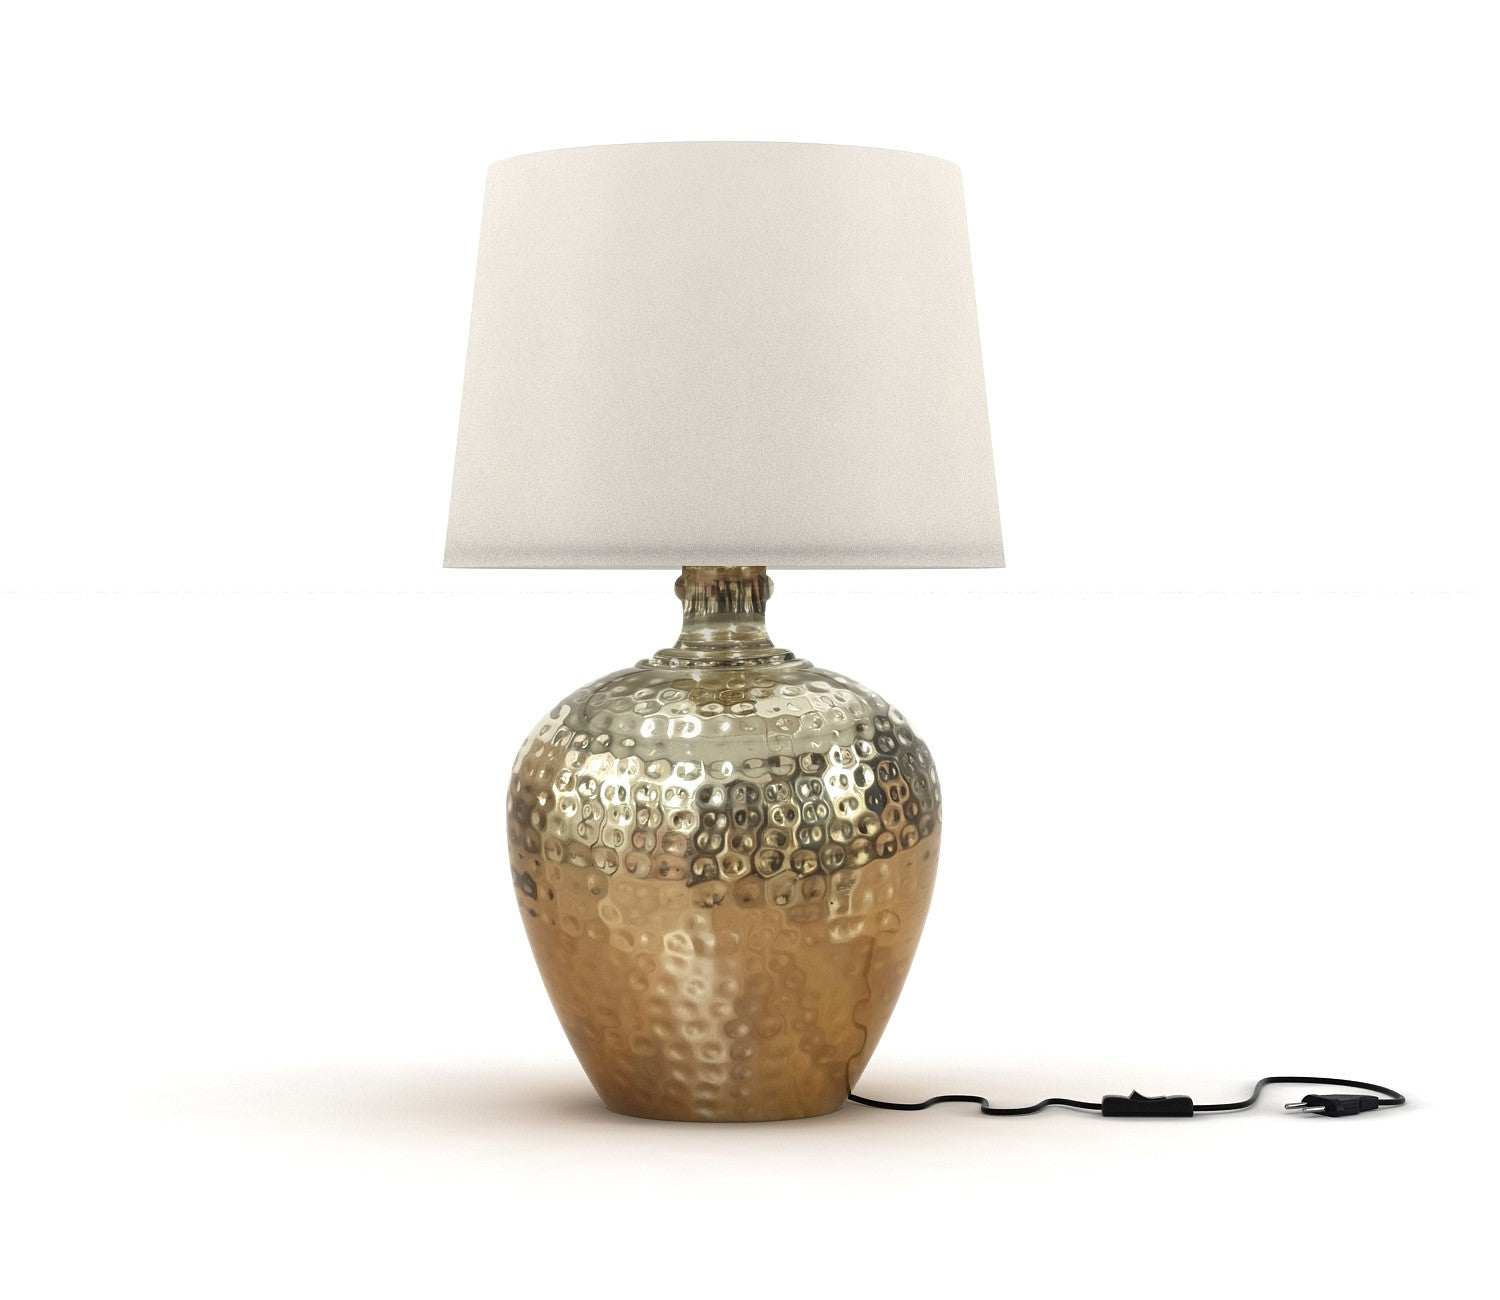 Vintage Gold Metal Table Lamp with White Fabric Shade